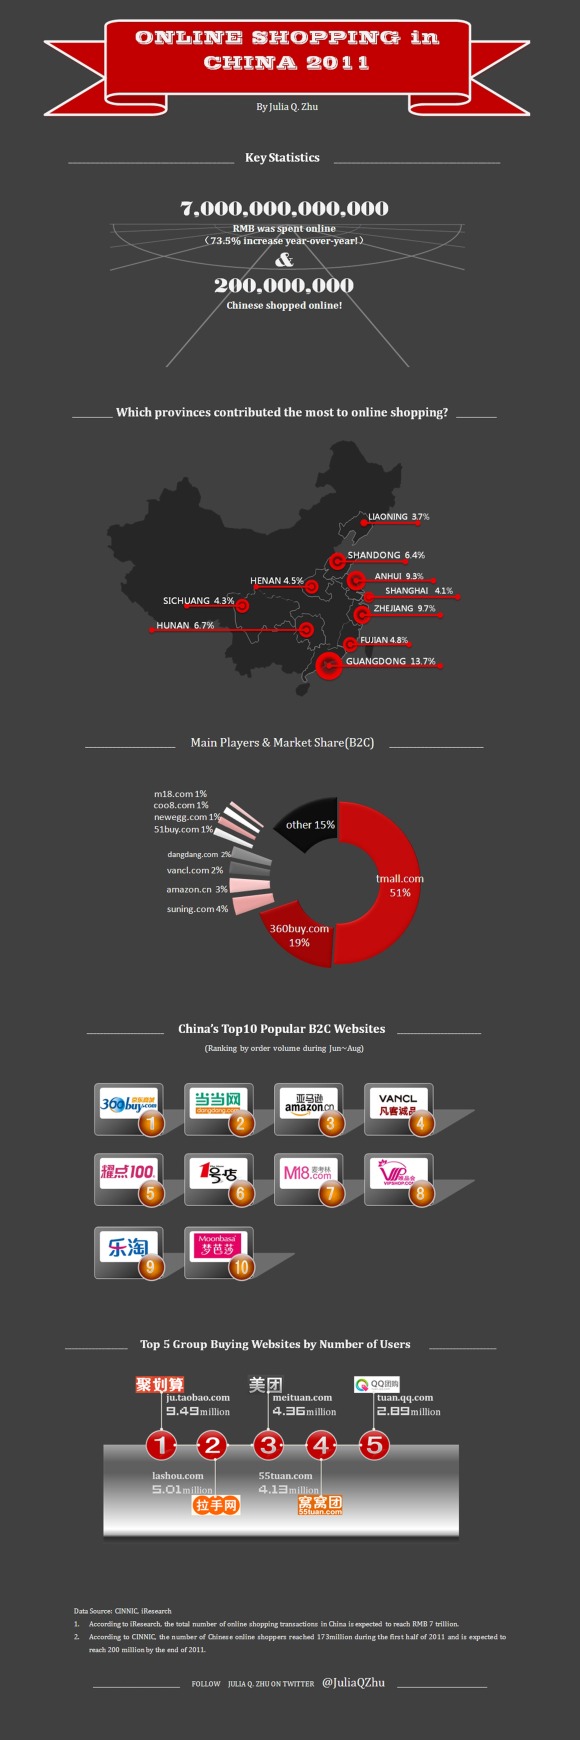 China Online Shopping 2011 Infographic